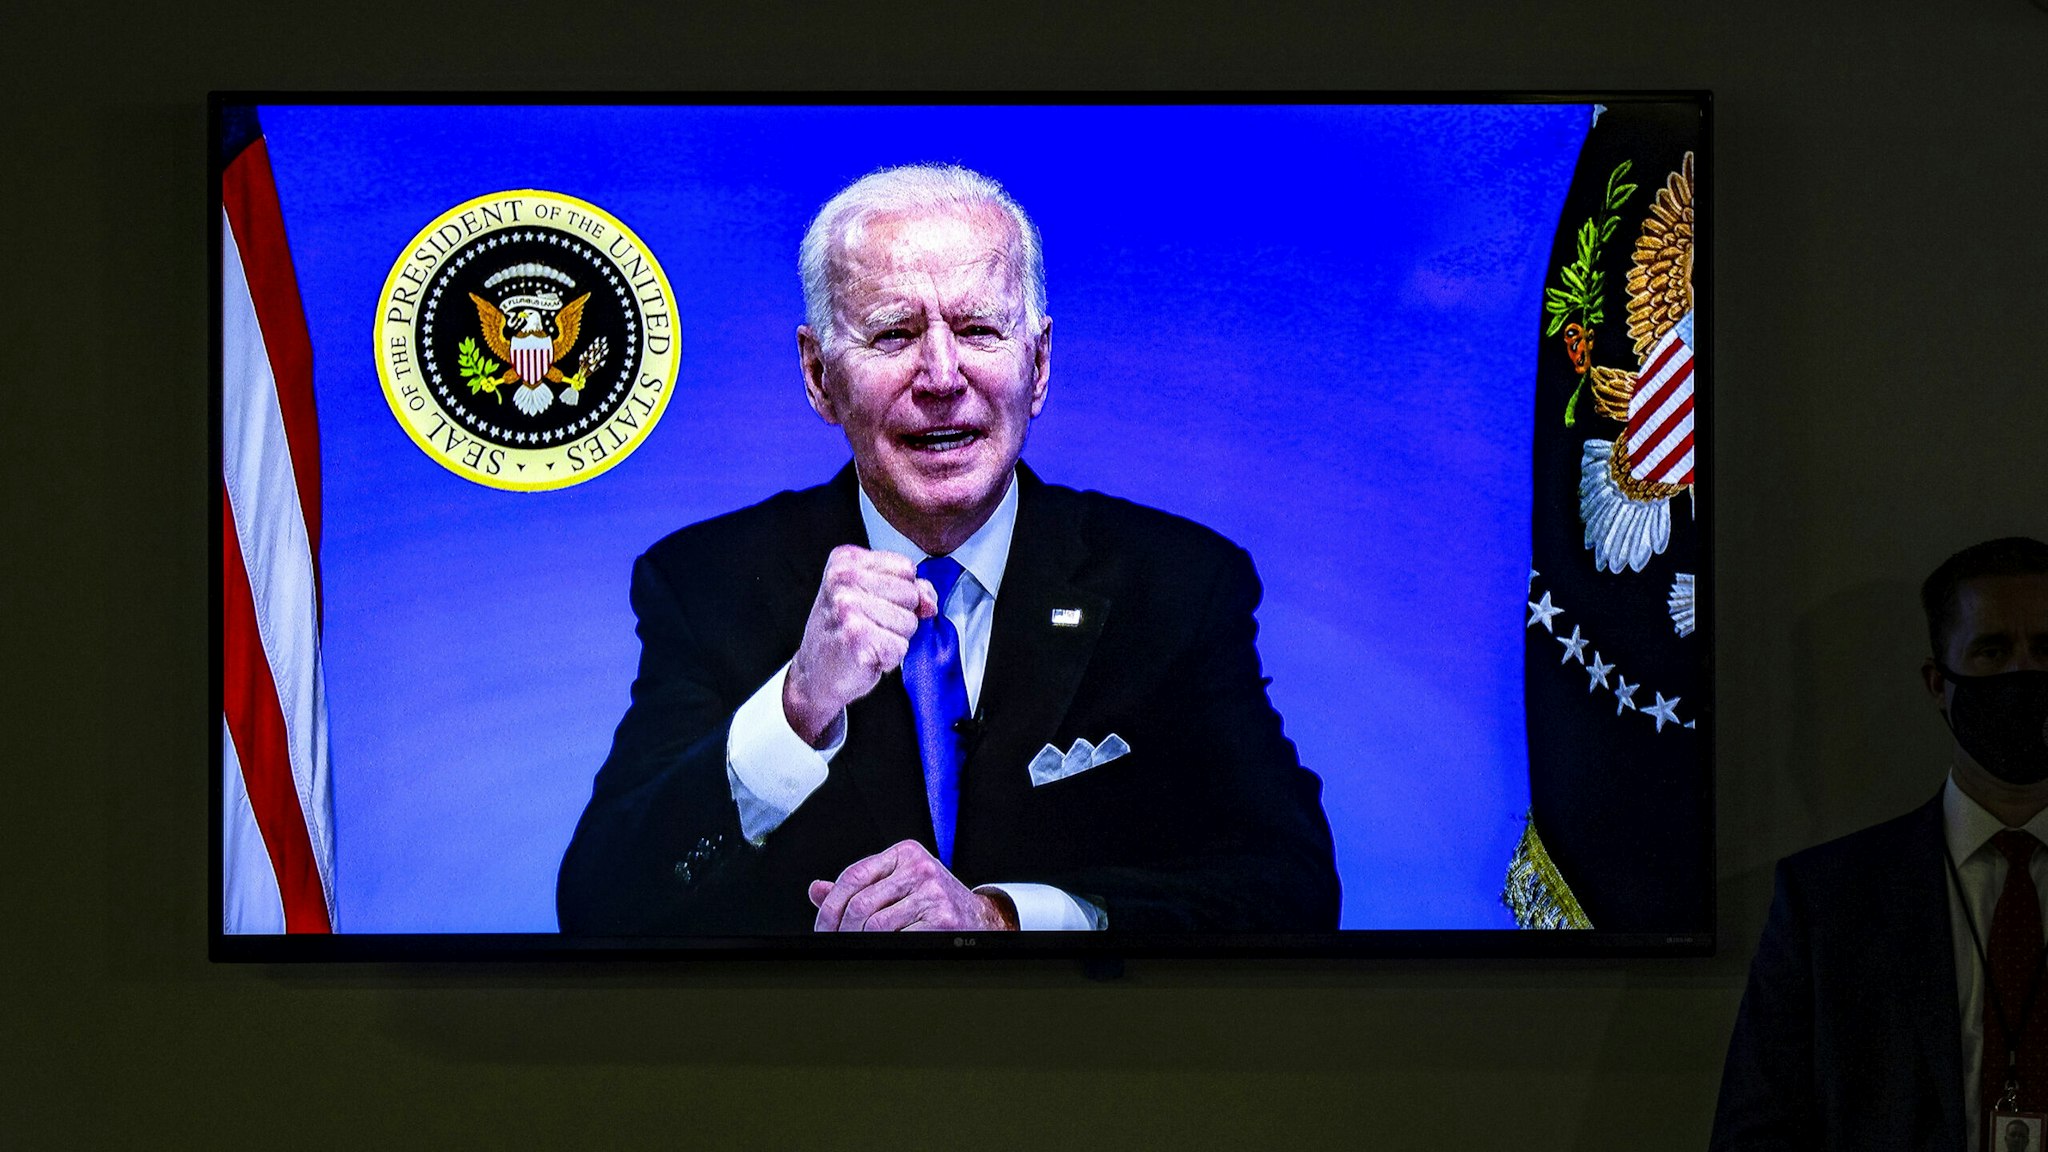 WASHINGTON, DC - MARCH 03: A screen in the auditorium shows President Joe Biden as he participates in a virtual event with members of the House Democratic Caucus from the South Court Auditorium in the Eisenhower Executive Office Building next to the White House on March 3, 2021 in Washington, DC.